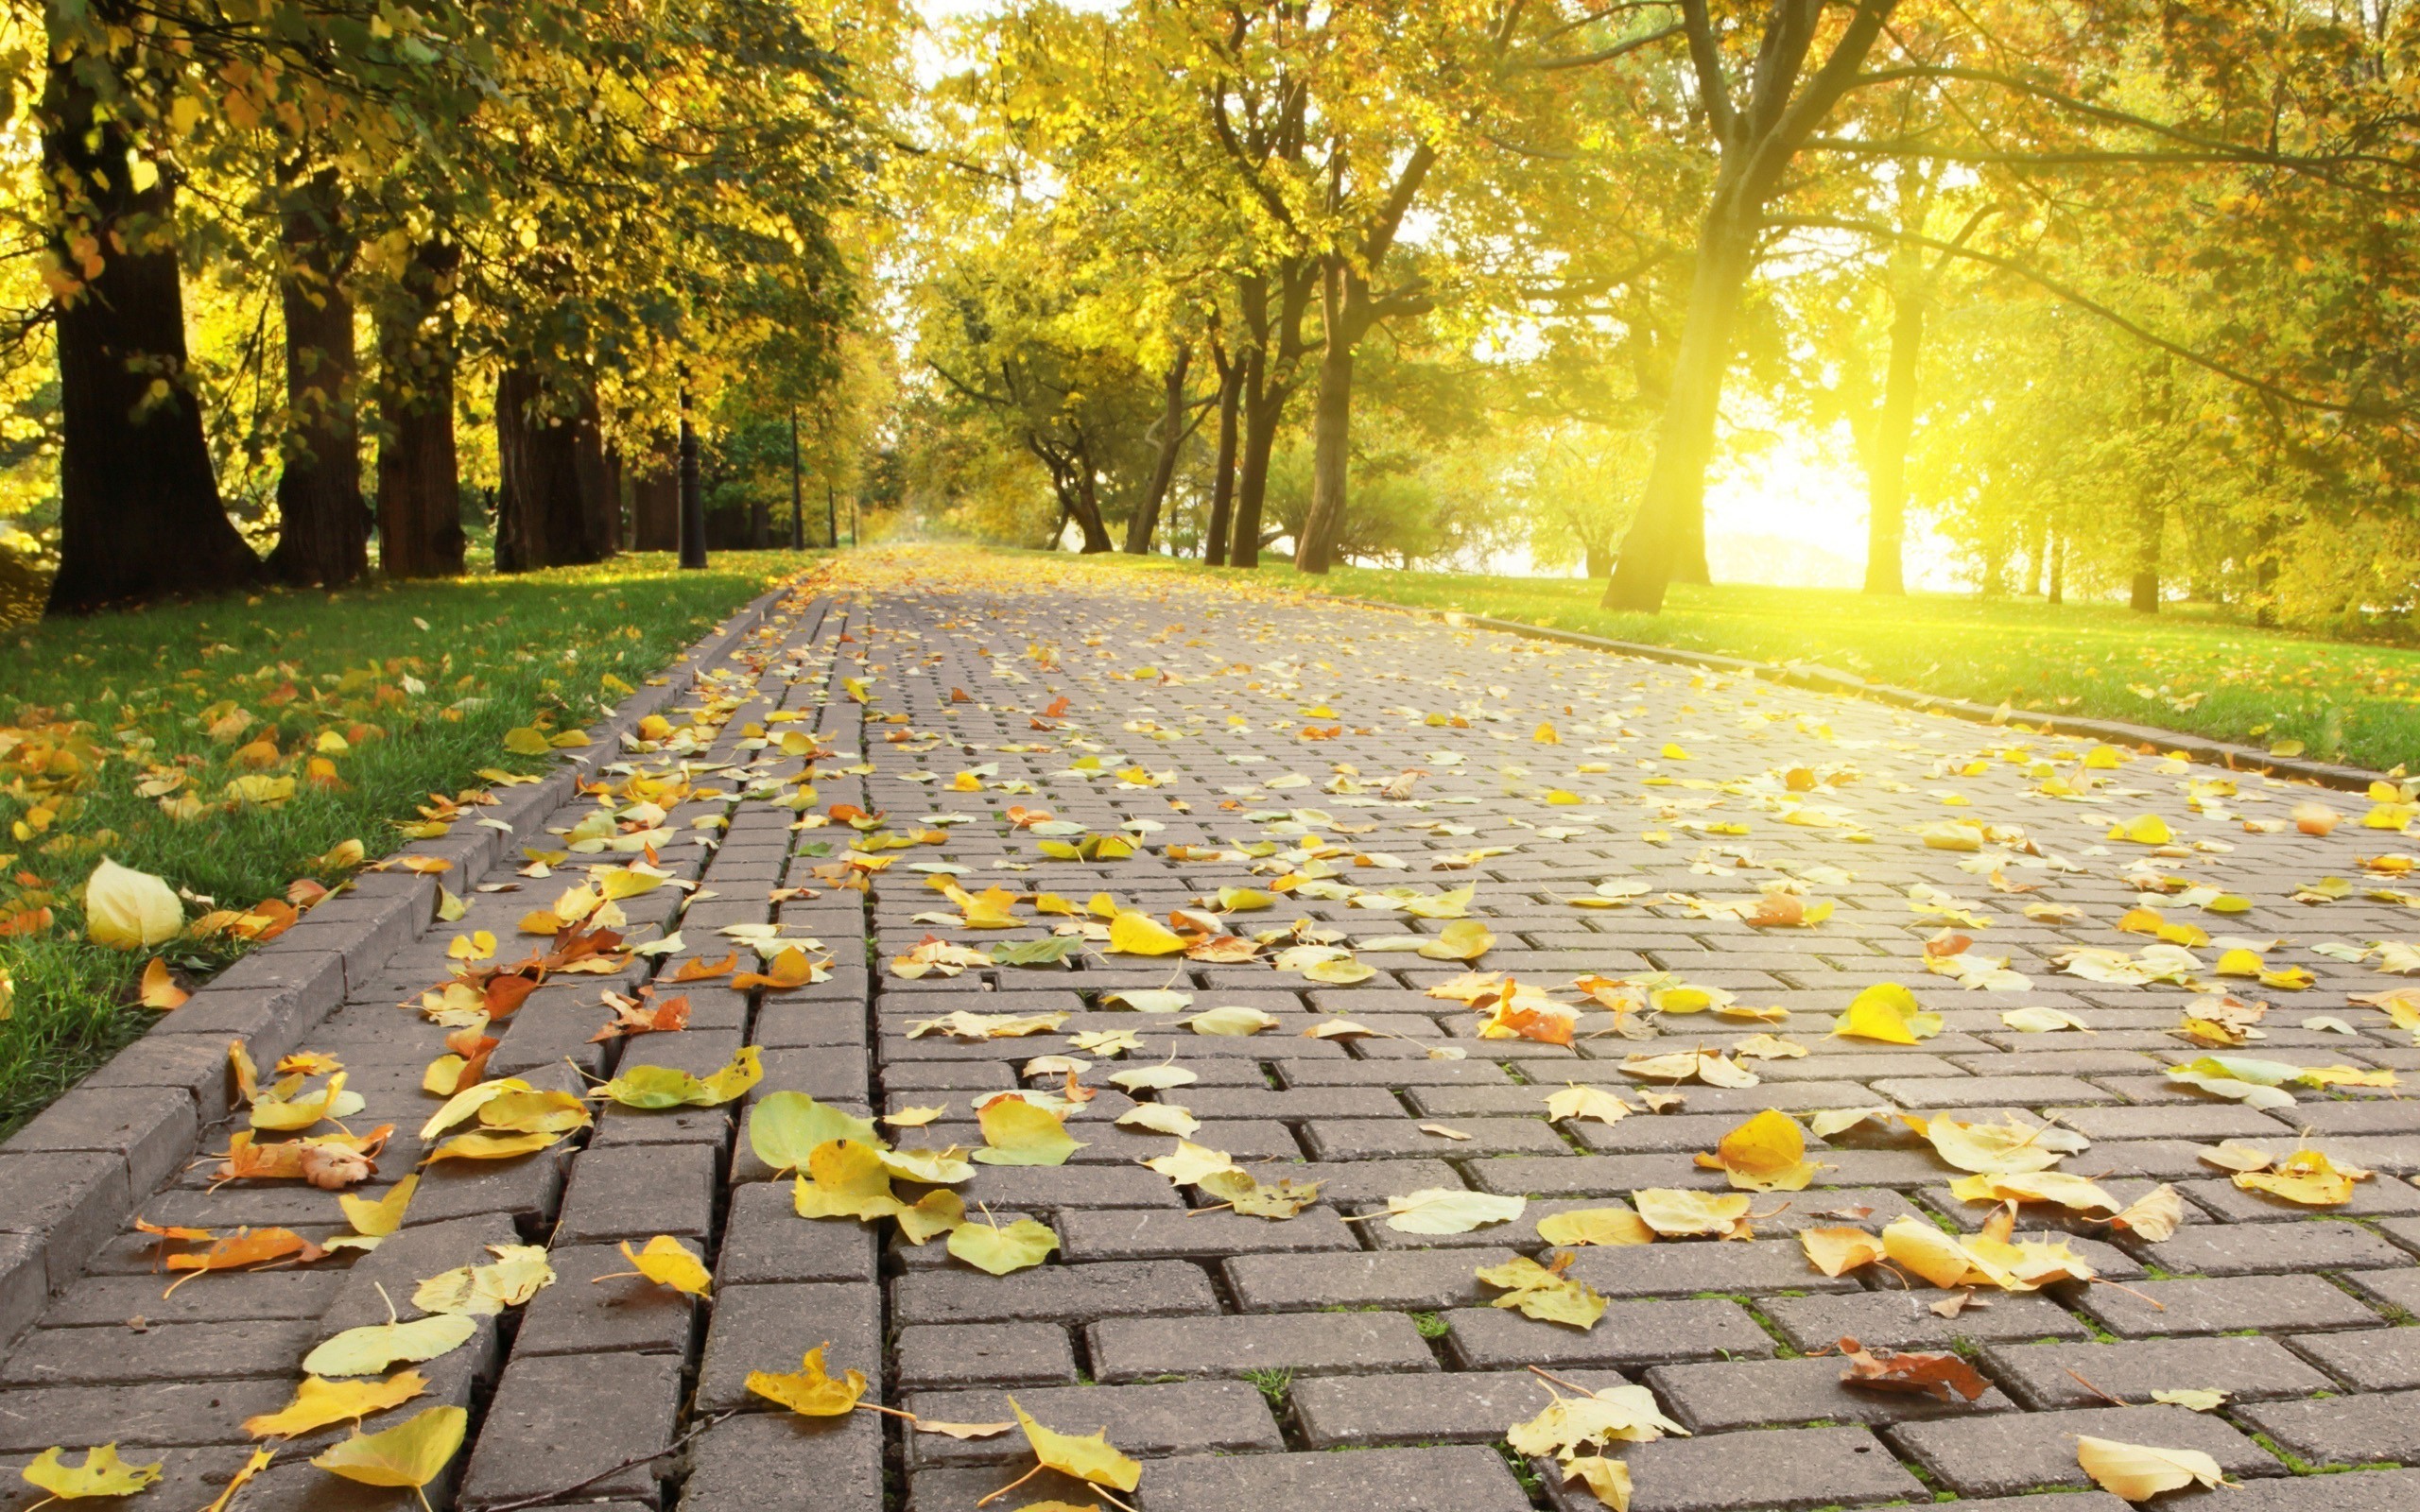 General 2560x1600 photography pavements leaves trees park Sun